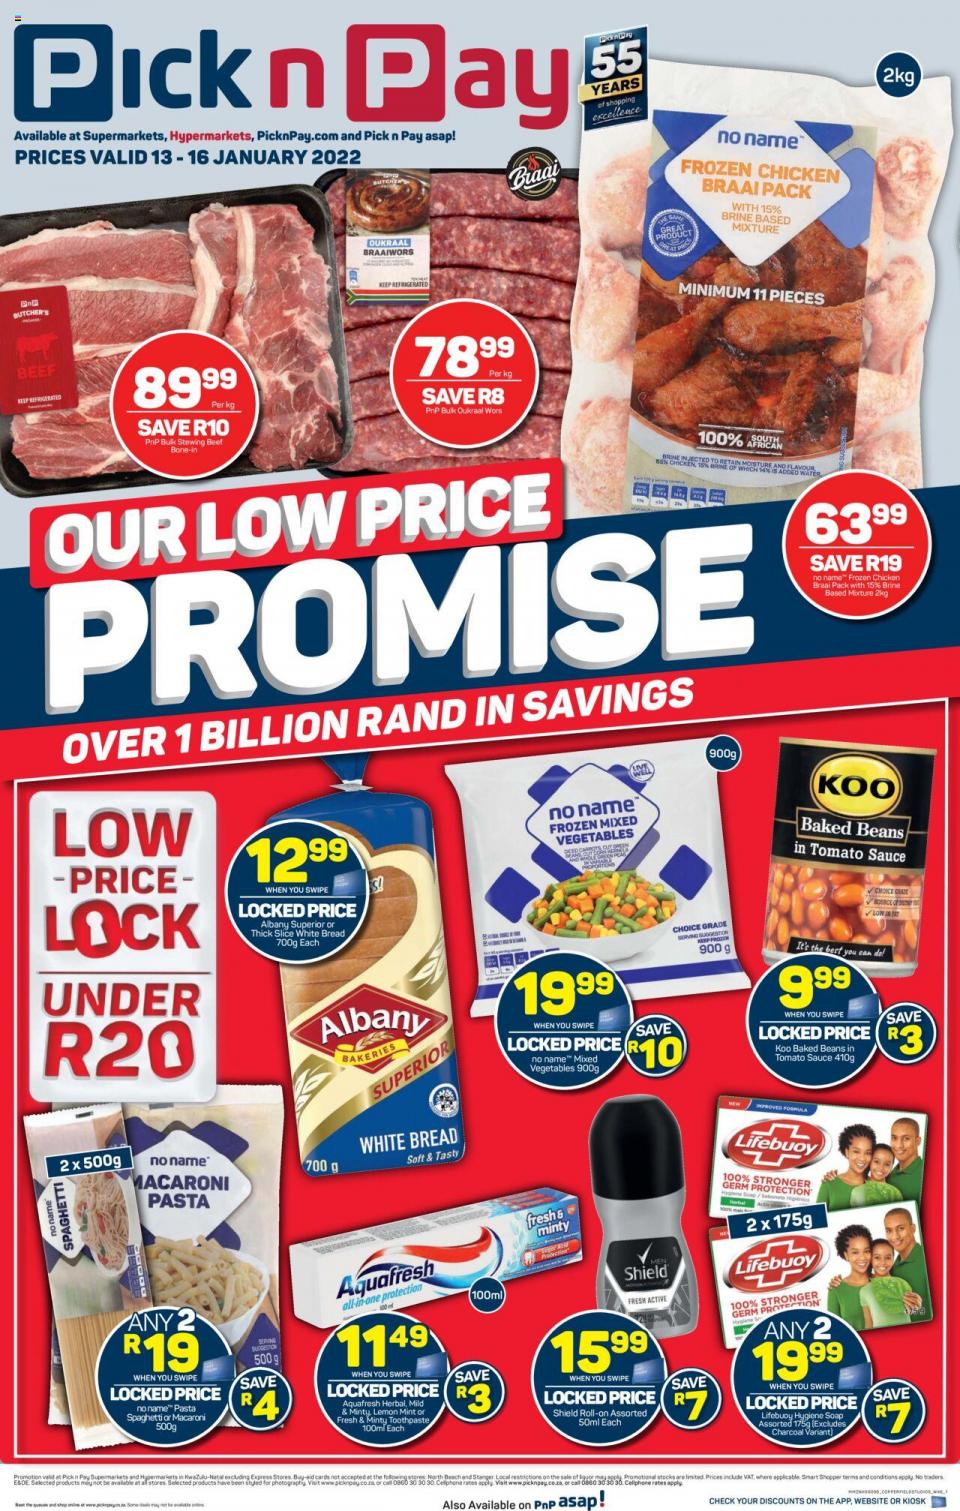 Pick n Pay Specials Low Price Promise 13 – 16 Jan 2022